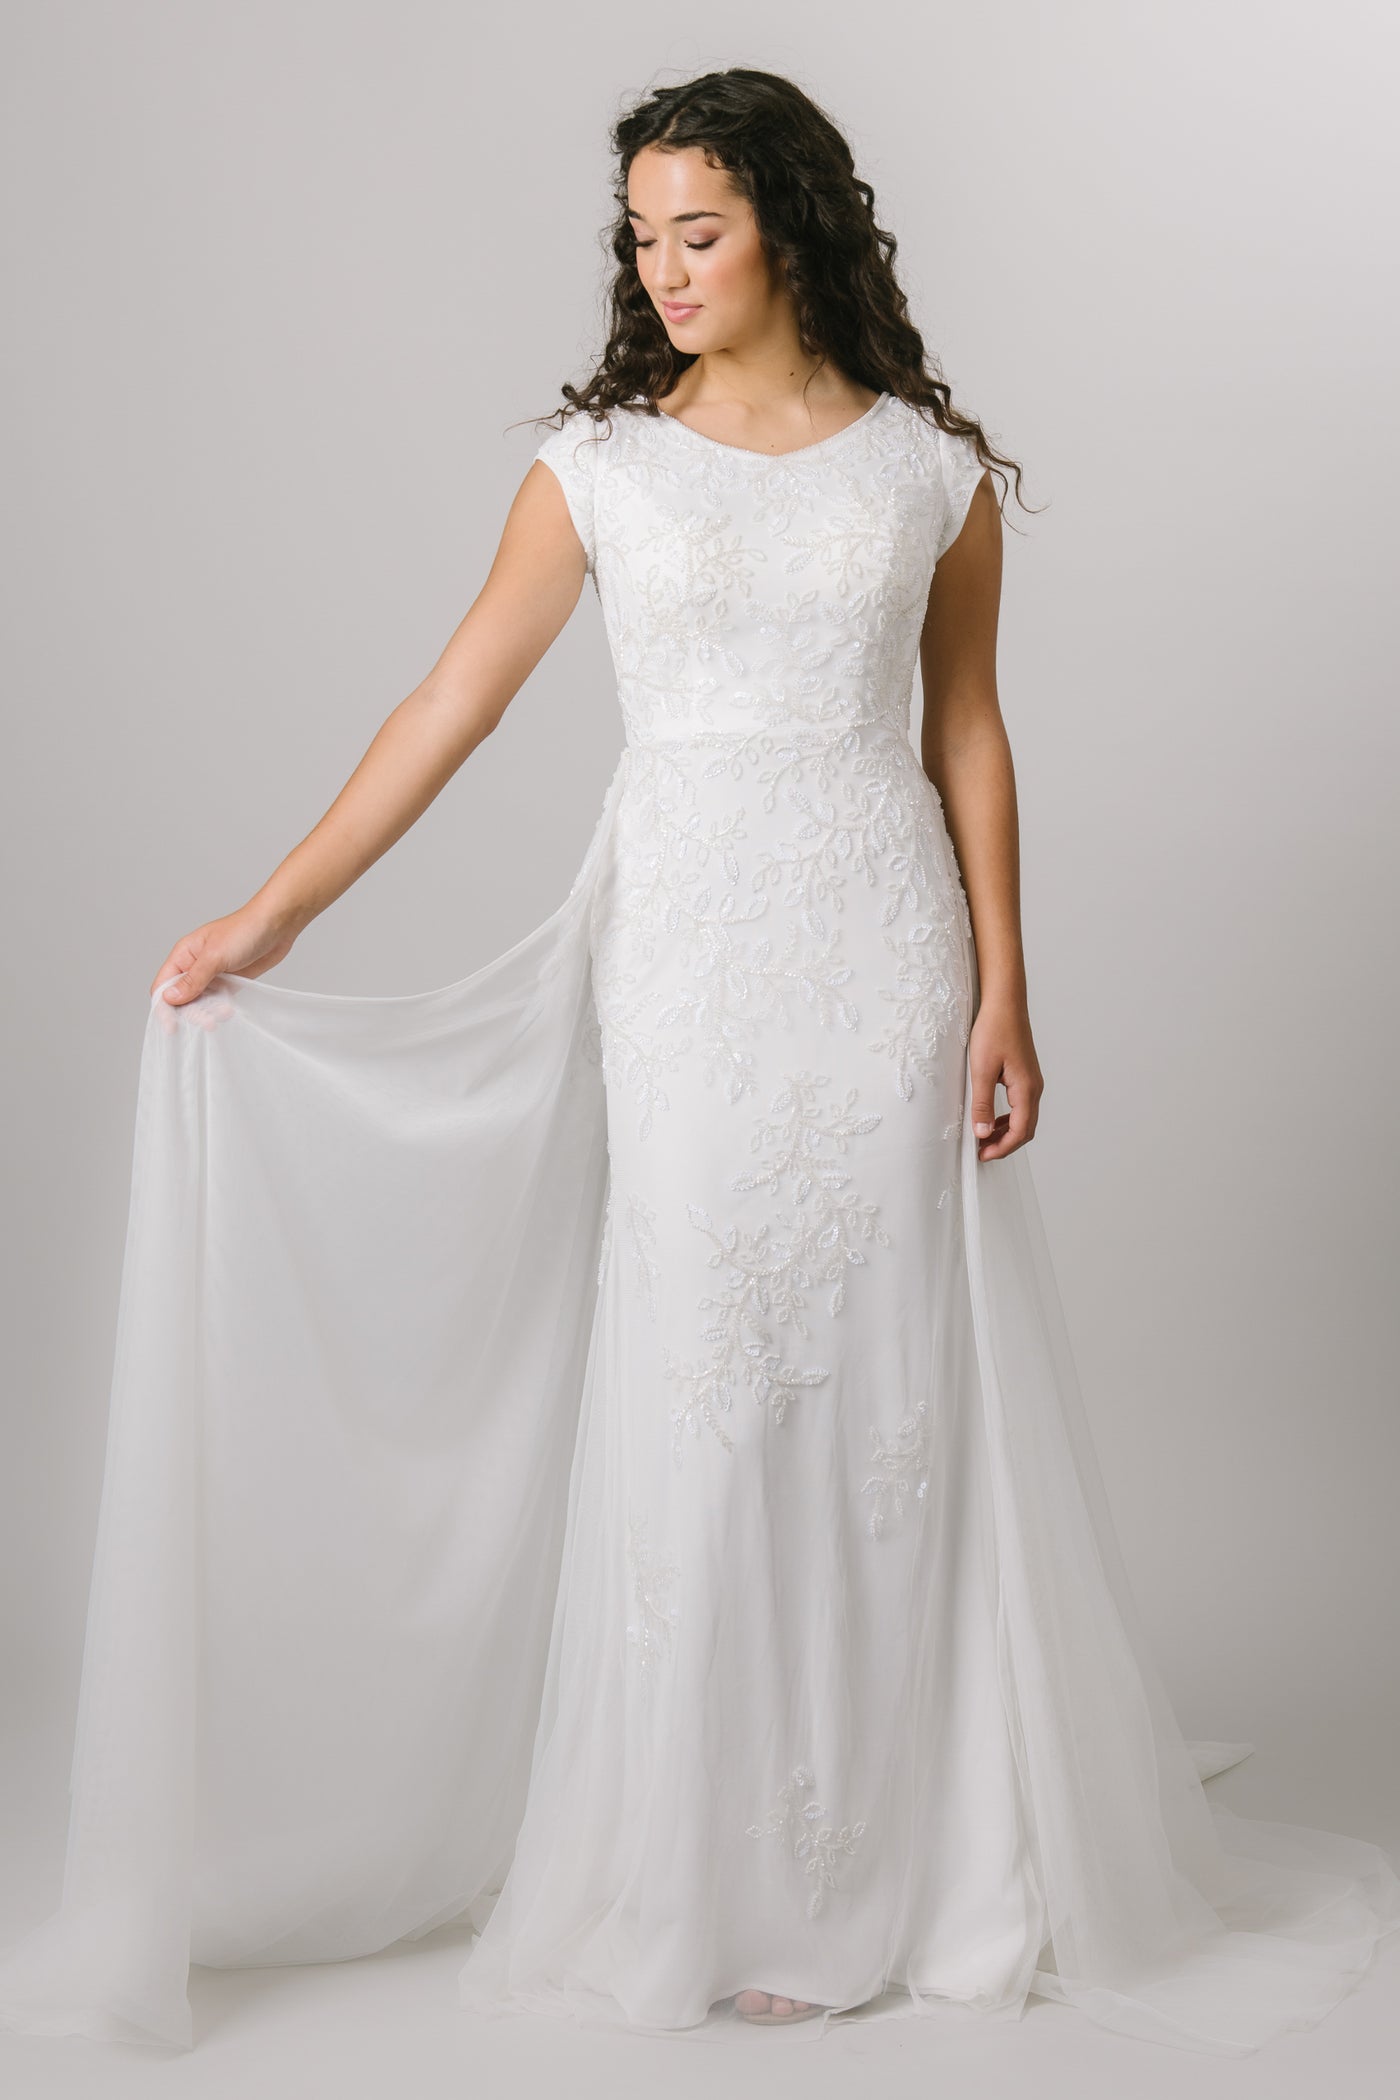 The Kalani is a fitted, modest wedding dress features a beaded lace applique, cap sleeves, a flowy skirt, and a soft scoop neckline.